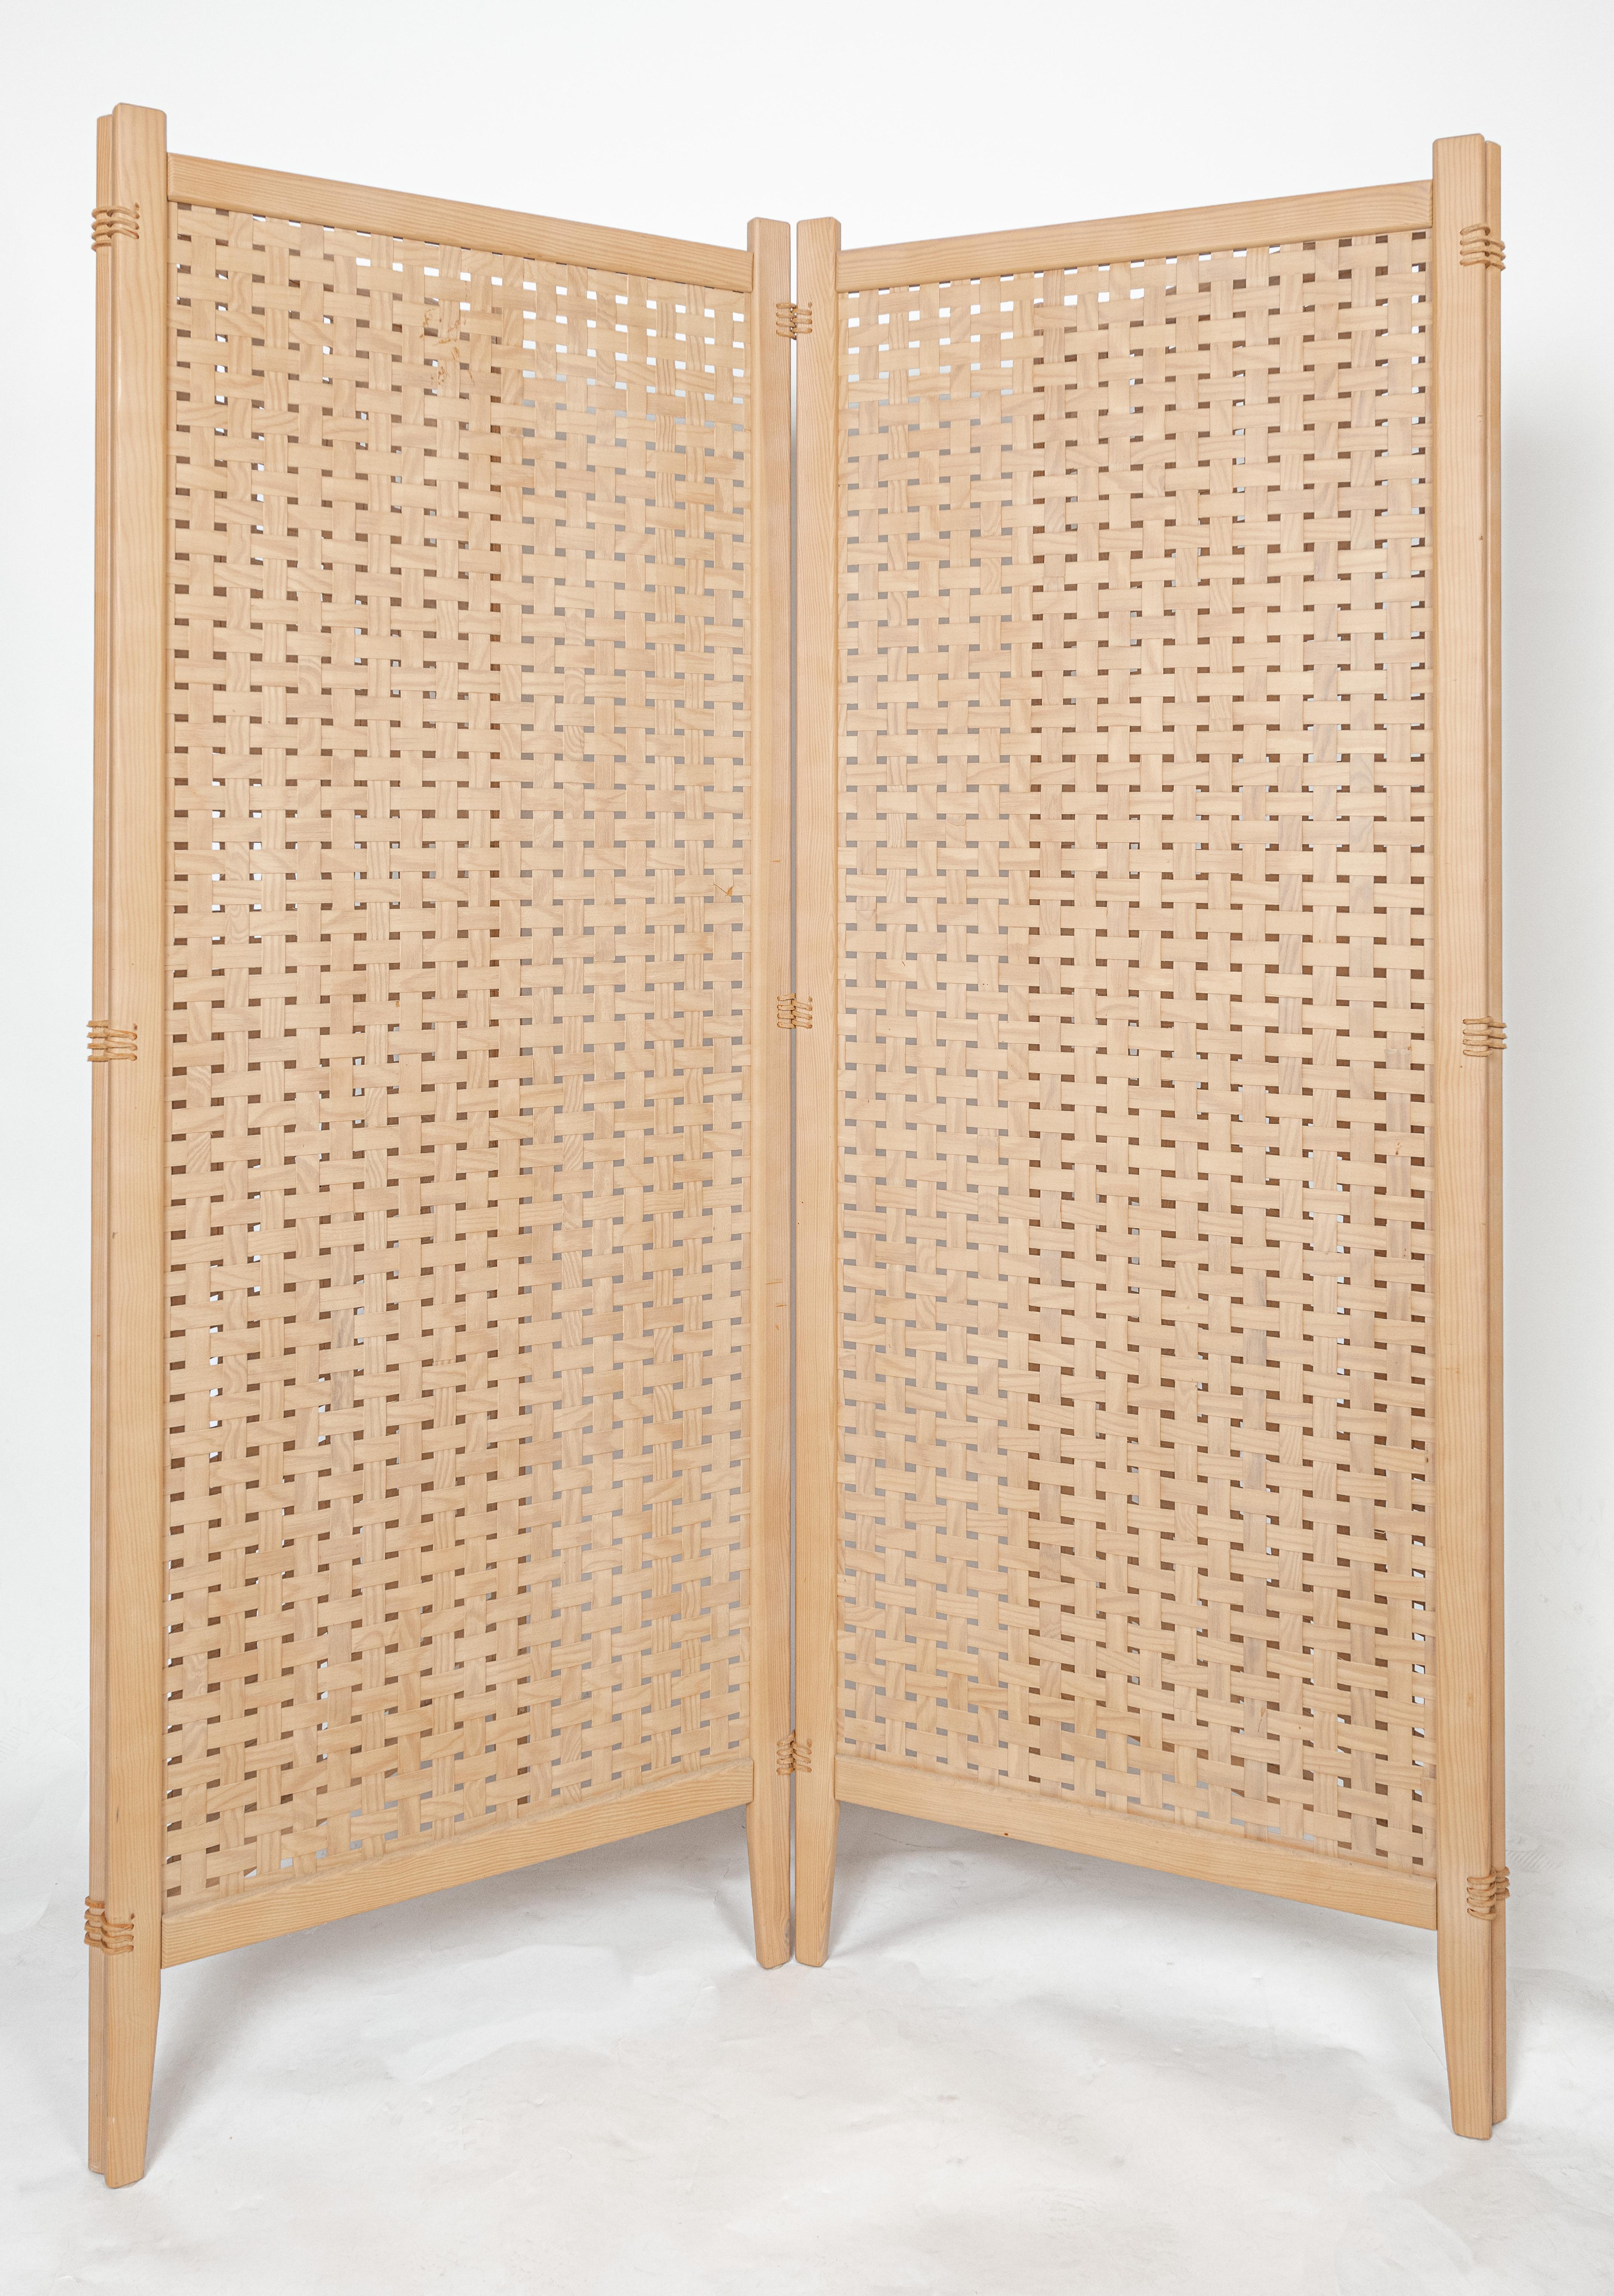 Alberts Tibro ‘Spåna’ Folding Screen Wood and Leather For Sale 1